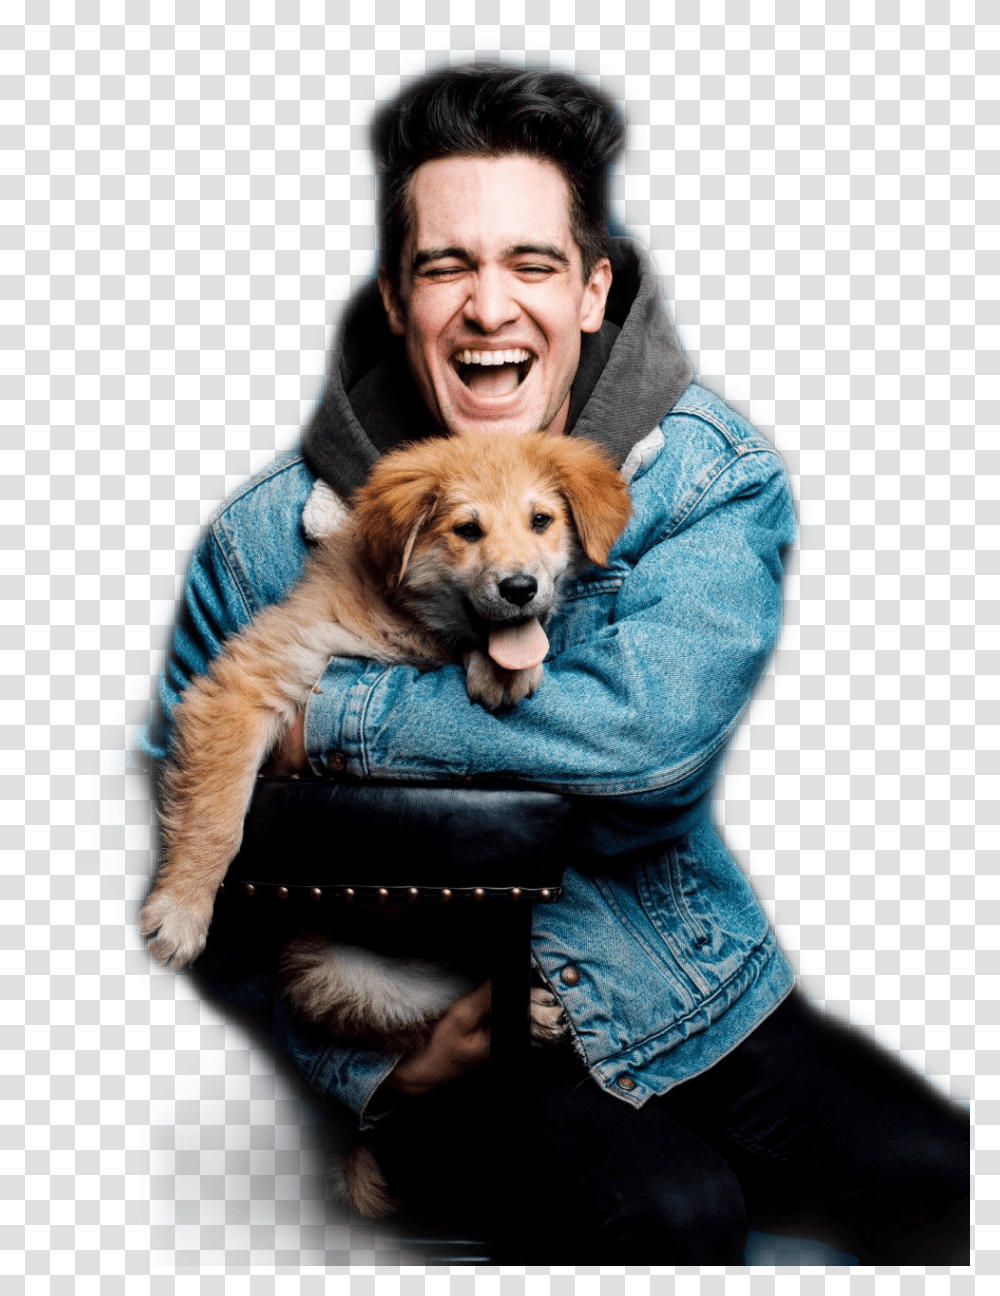 Brendonurie Panic At The Disco Panic At The Disco Brendon Urie With Dogs, Pants, Person, Jeans Transparent Png